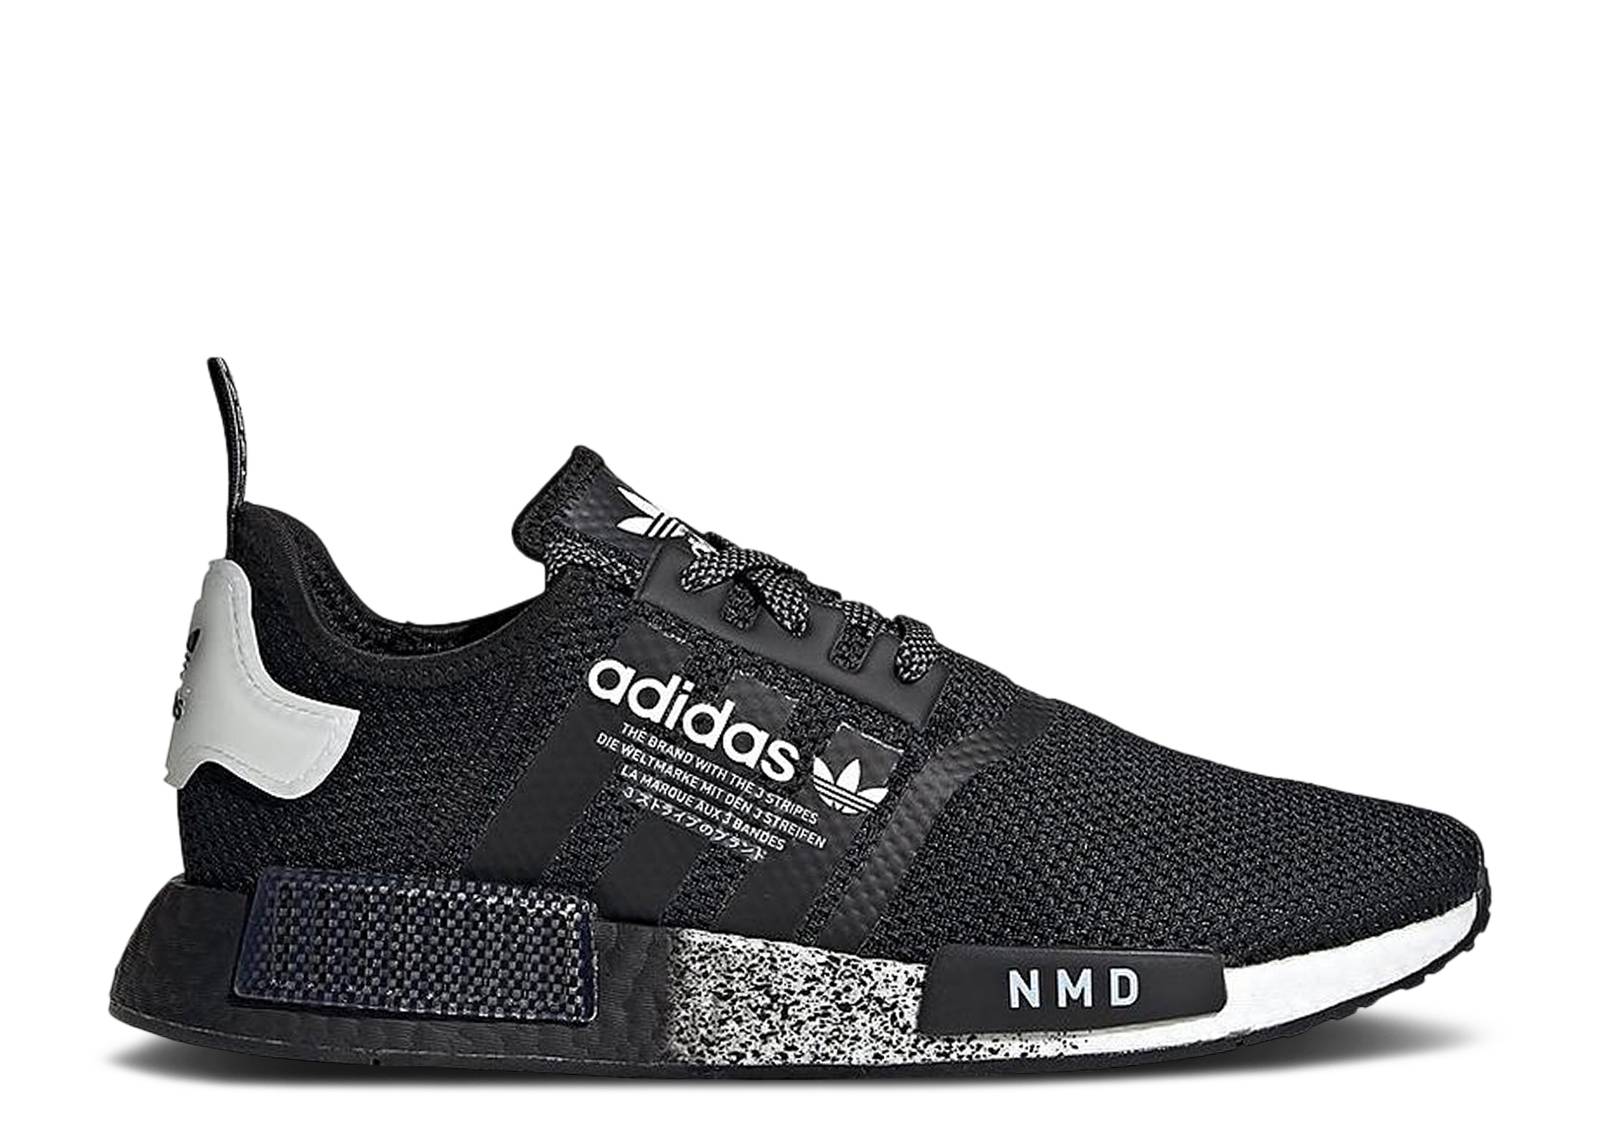 NMD_R1 'Black Speckled'